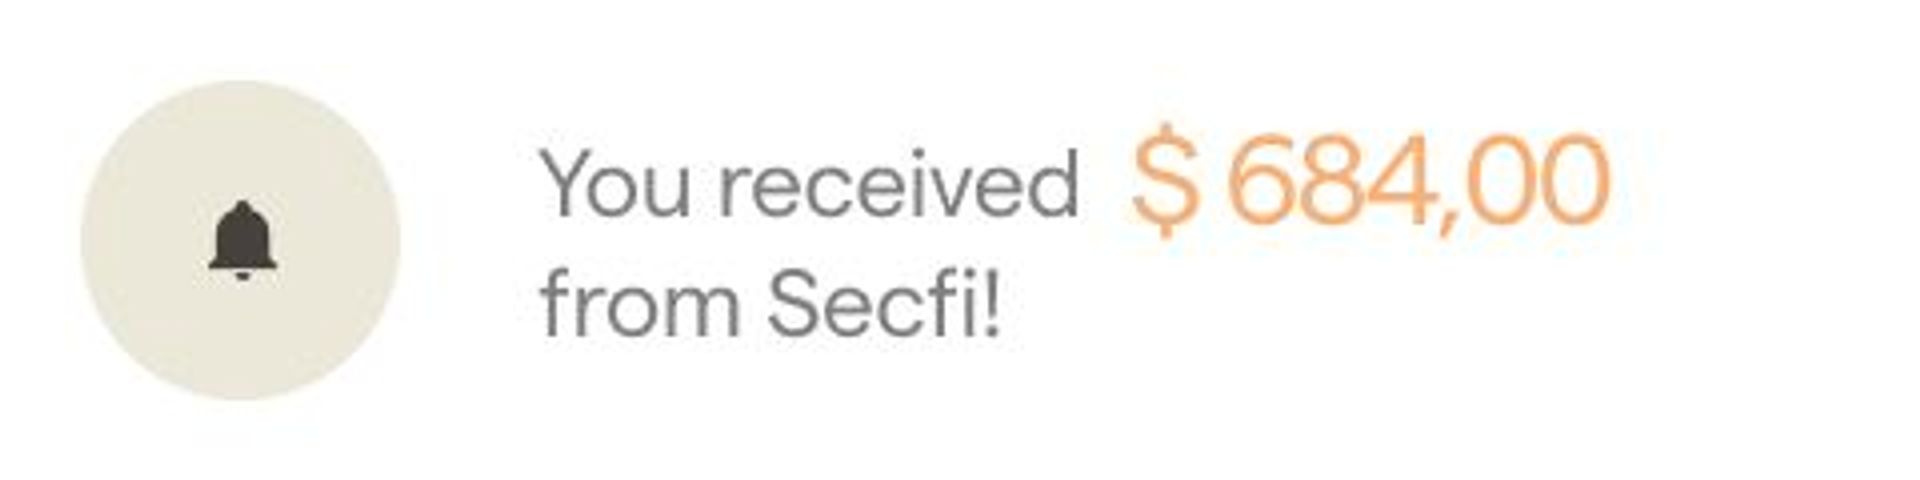 You received $68400 from Secfi